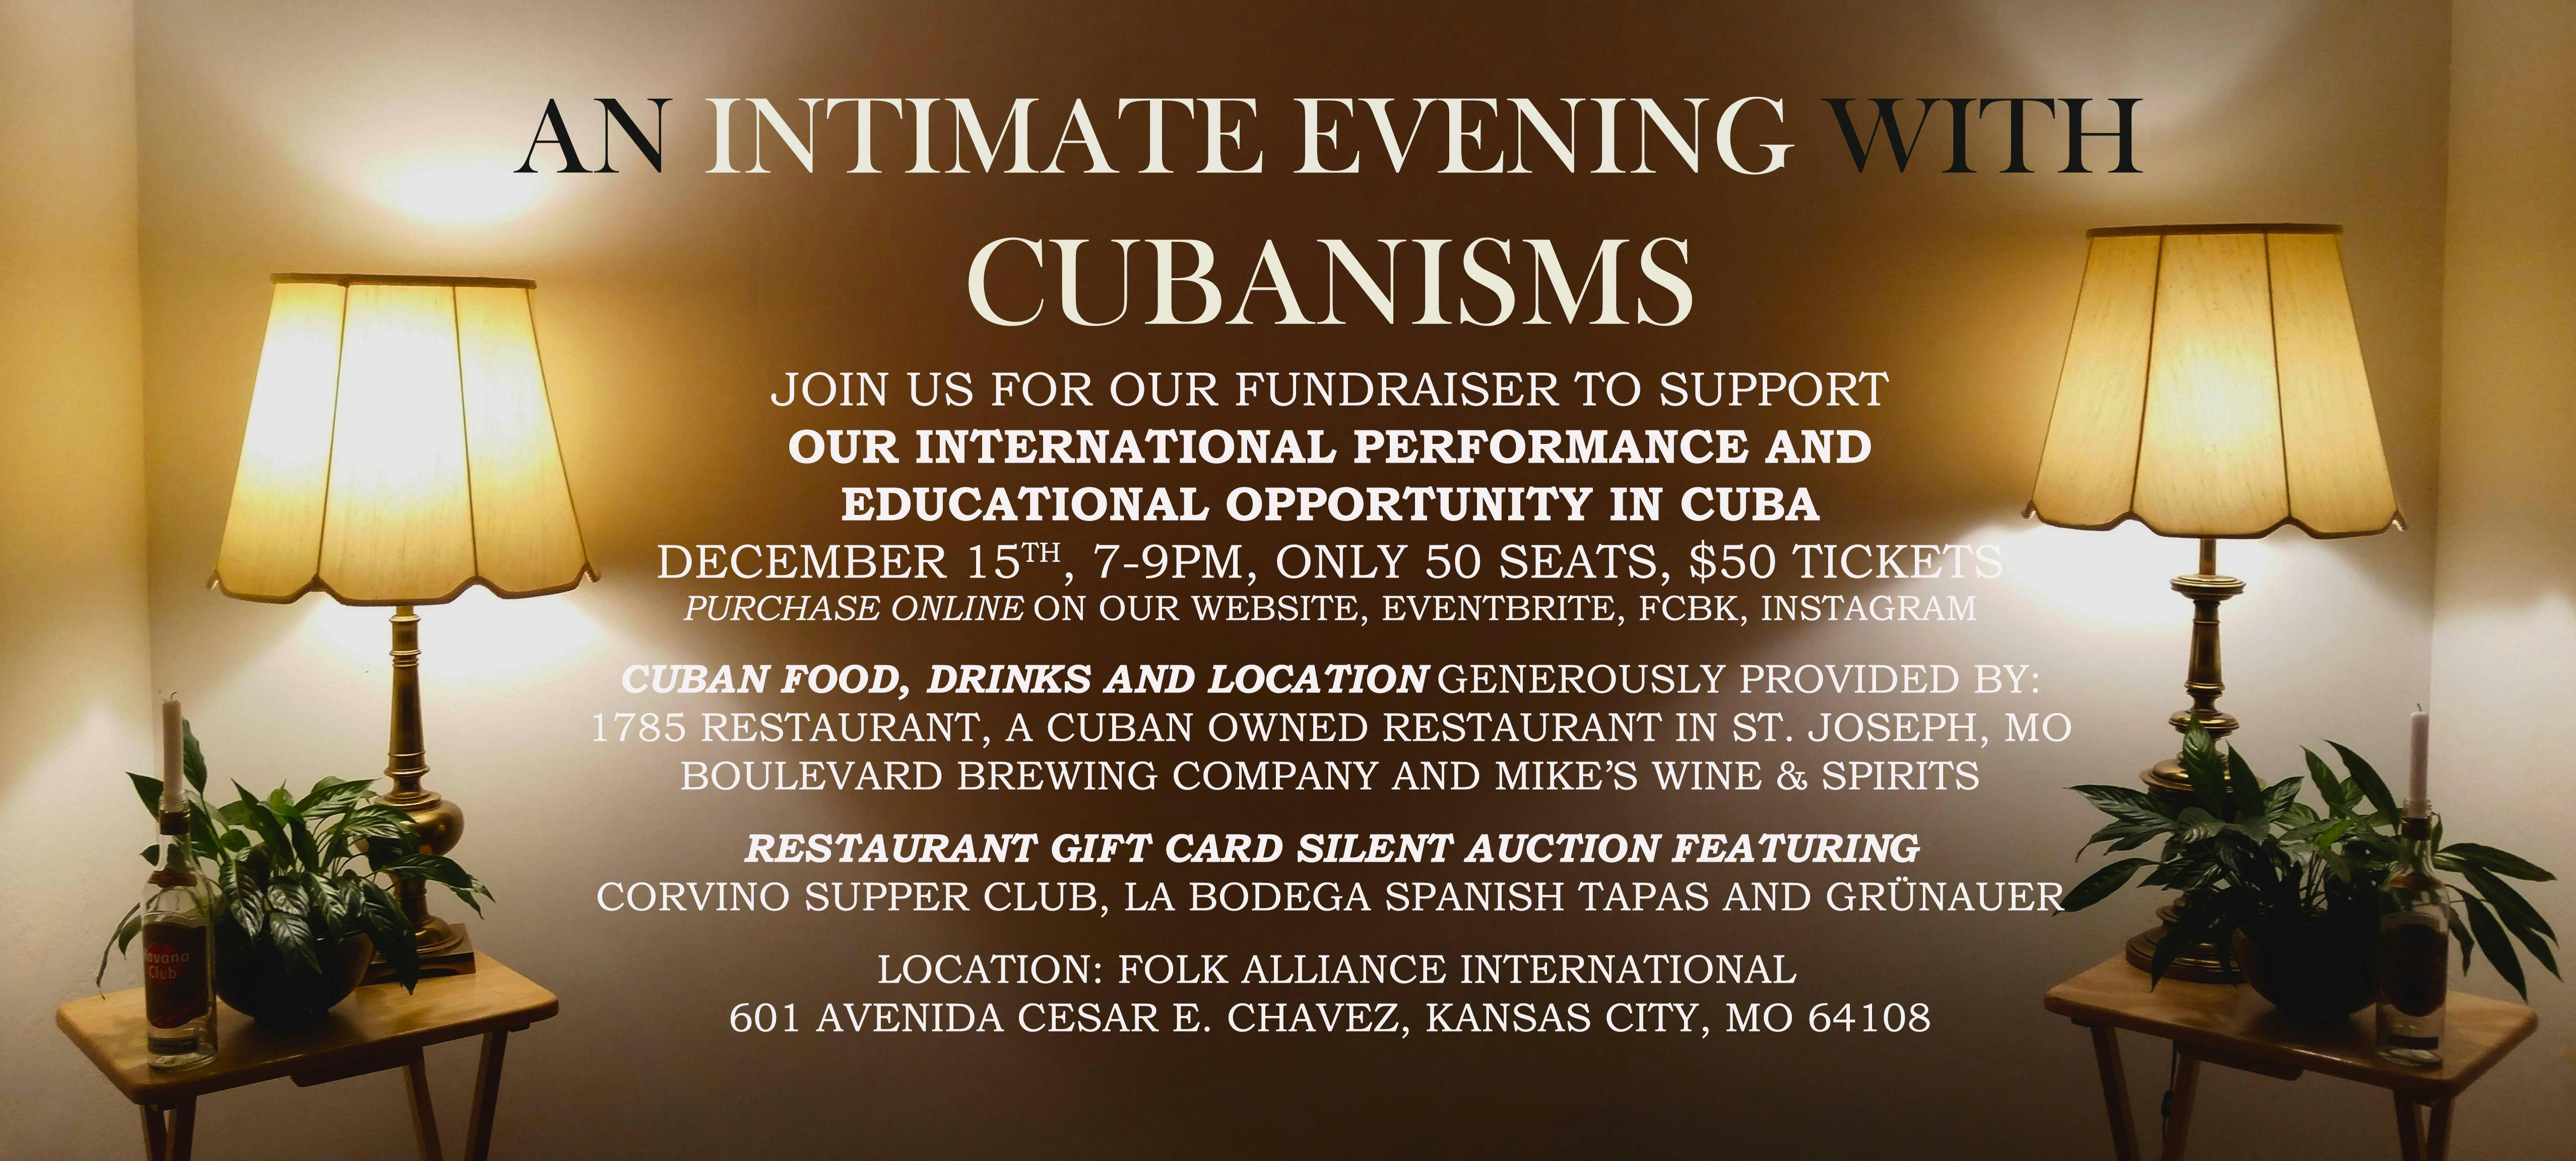 An intimate evening with Cubanisms